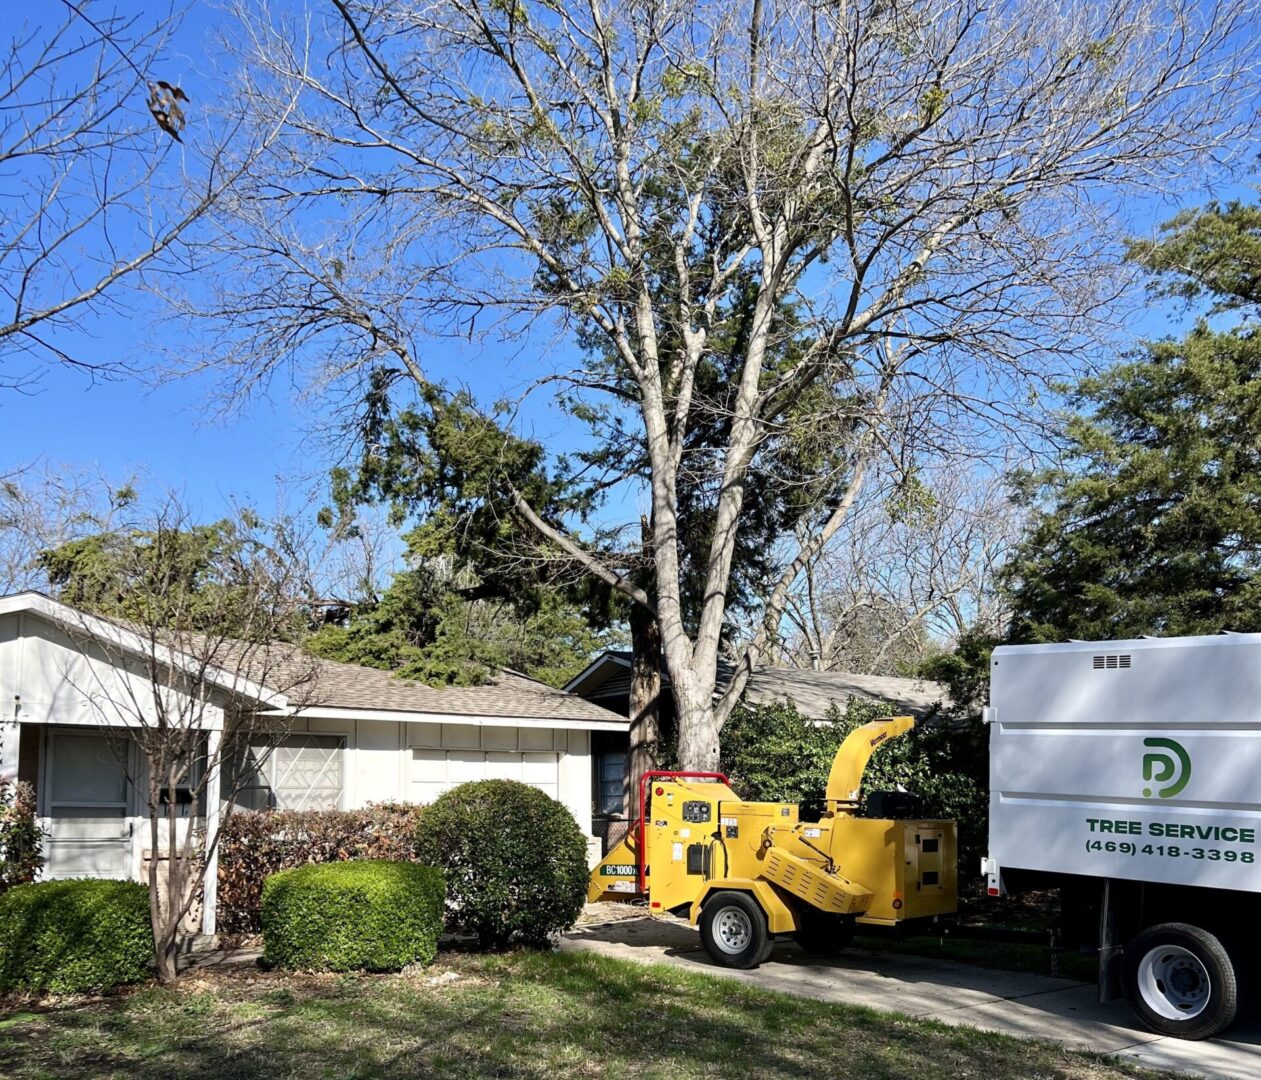 A tree removal truck parked in front of a house.